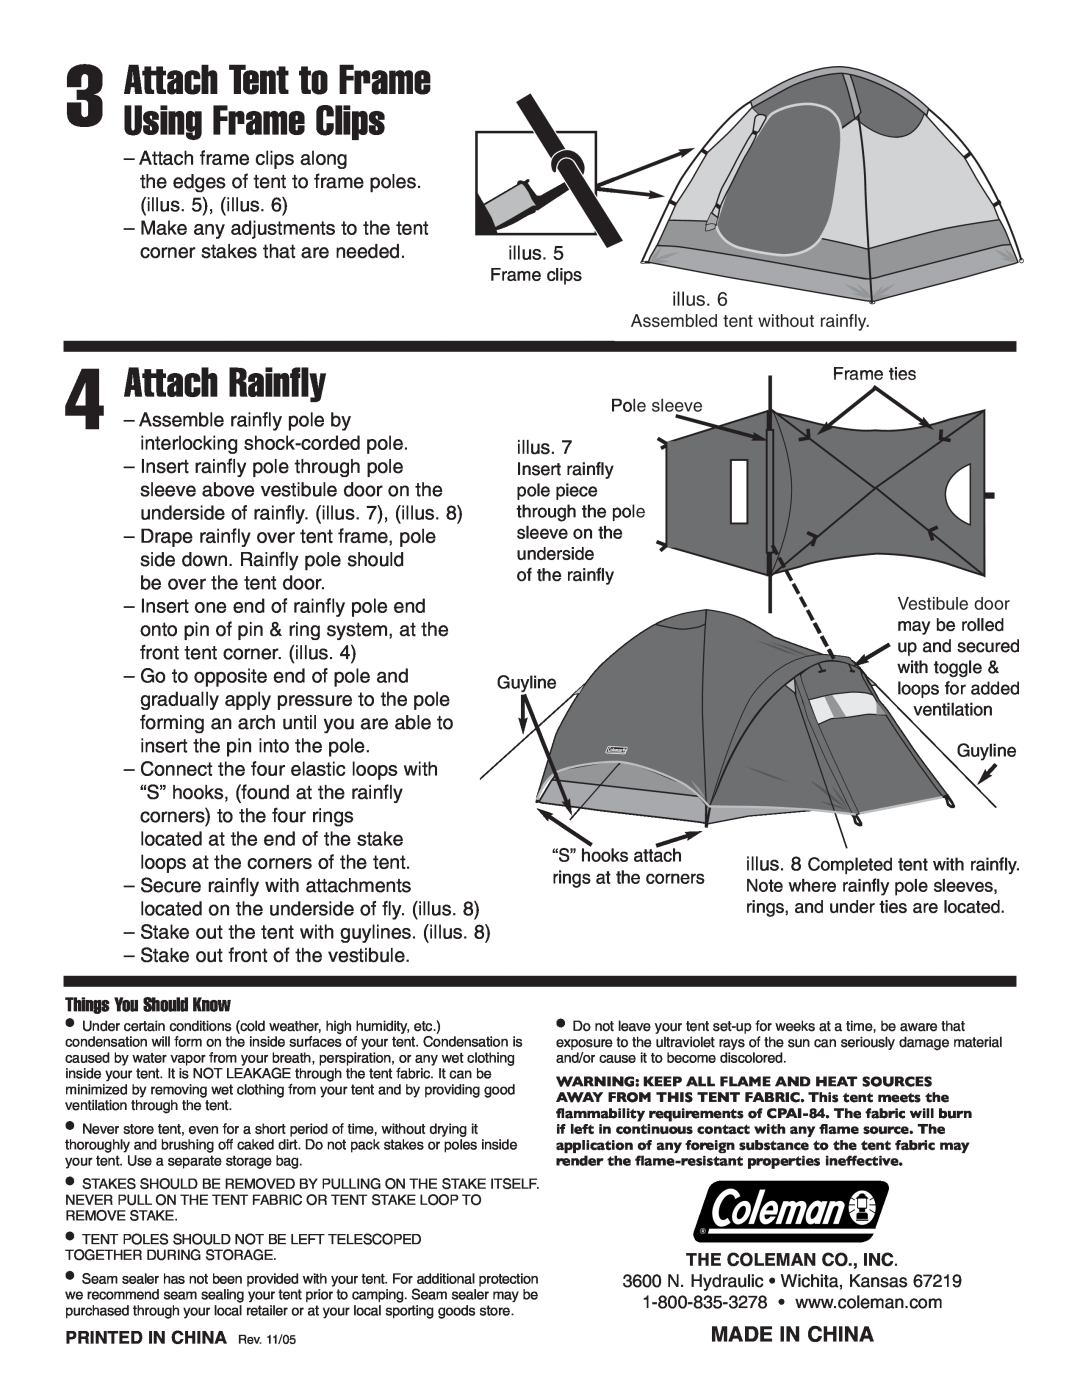 Coleman 9260D727 manual Attach Rainfly, Attach Tent to Frame Using Frame Clips, Made In China 